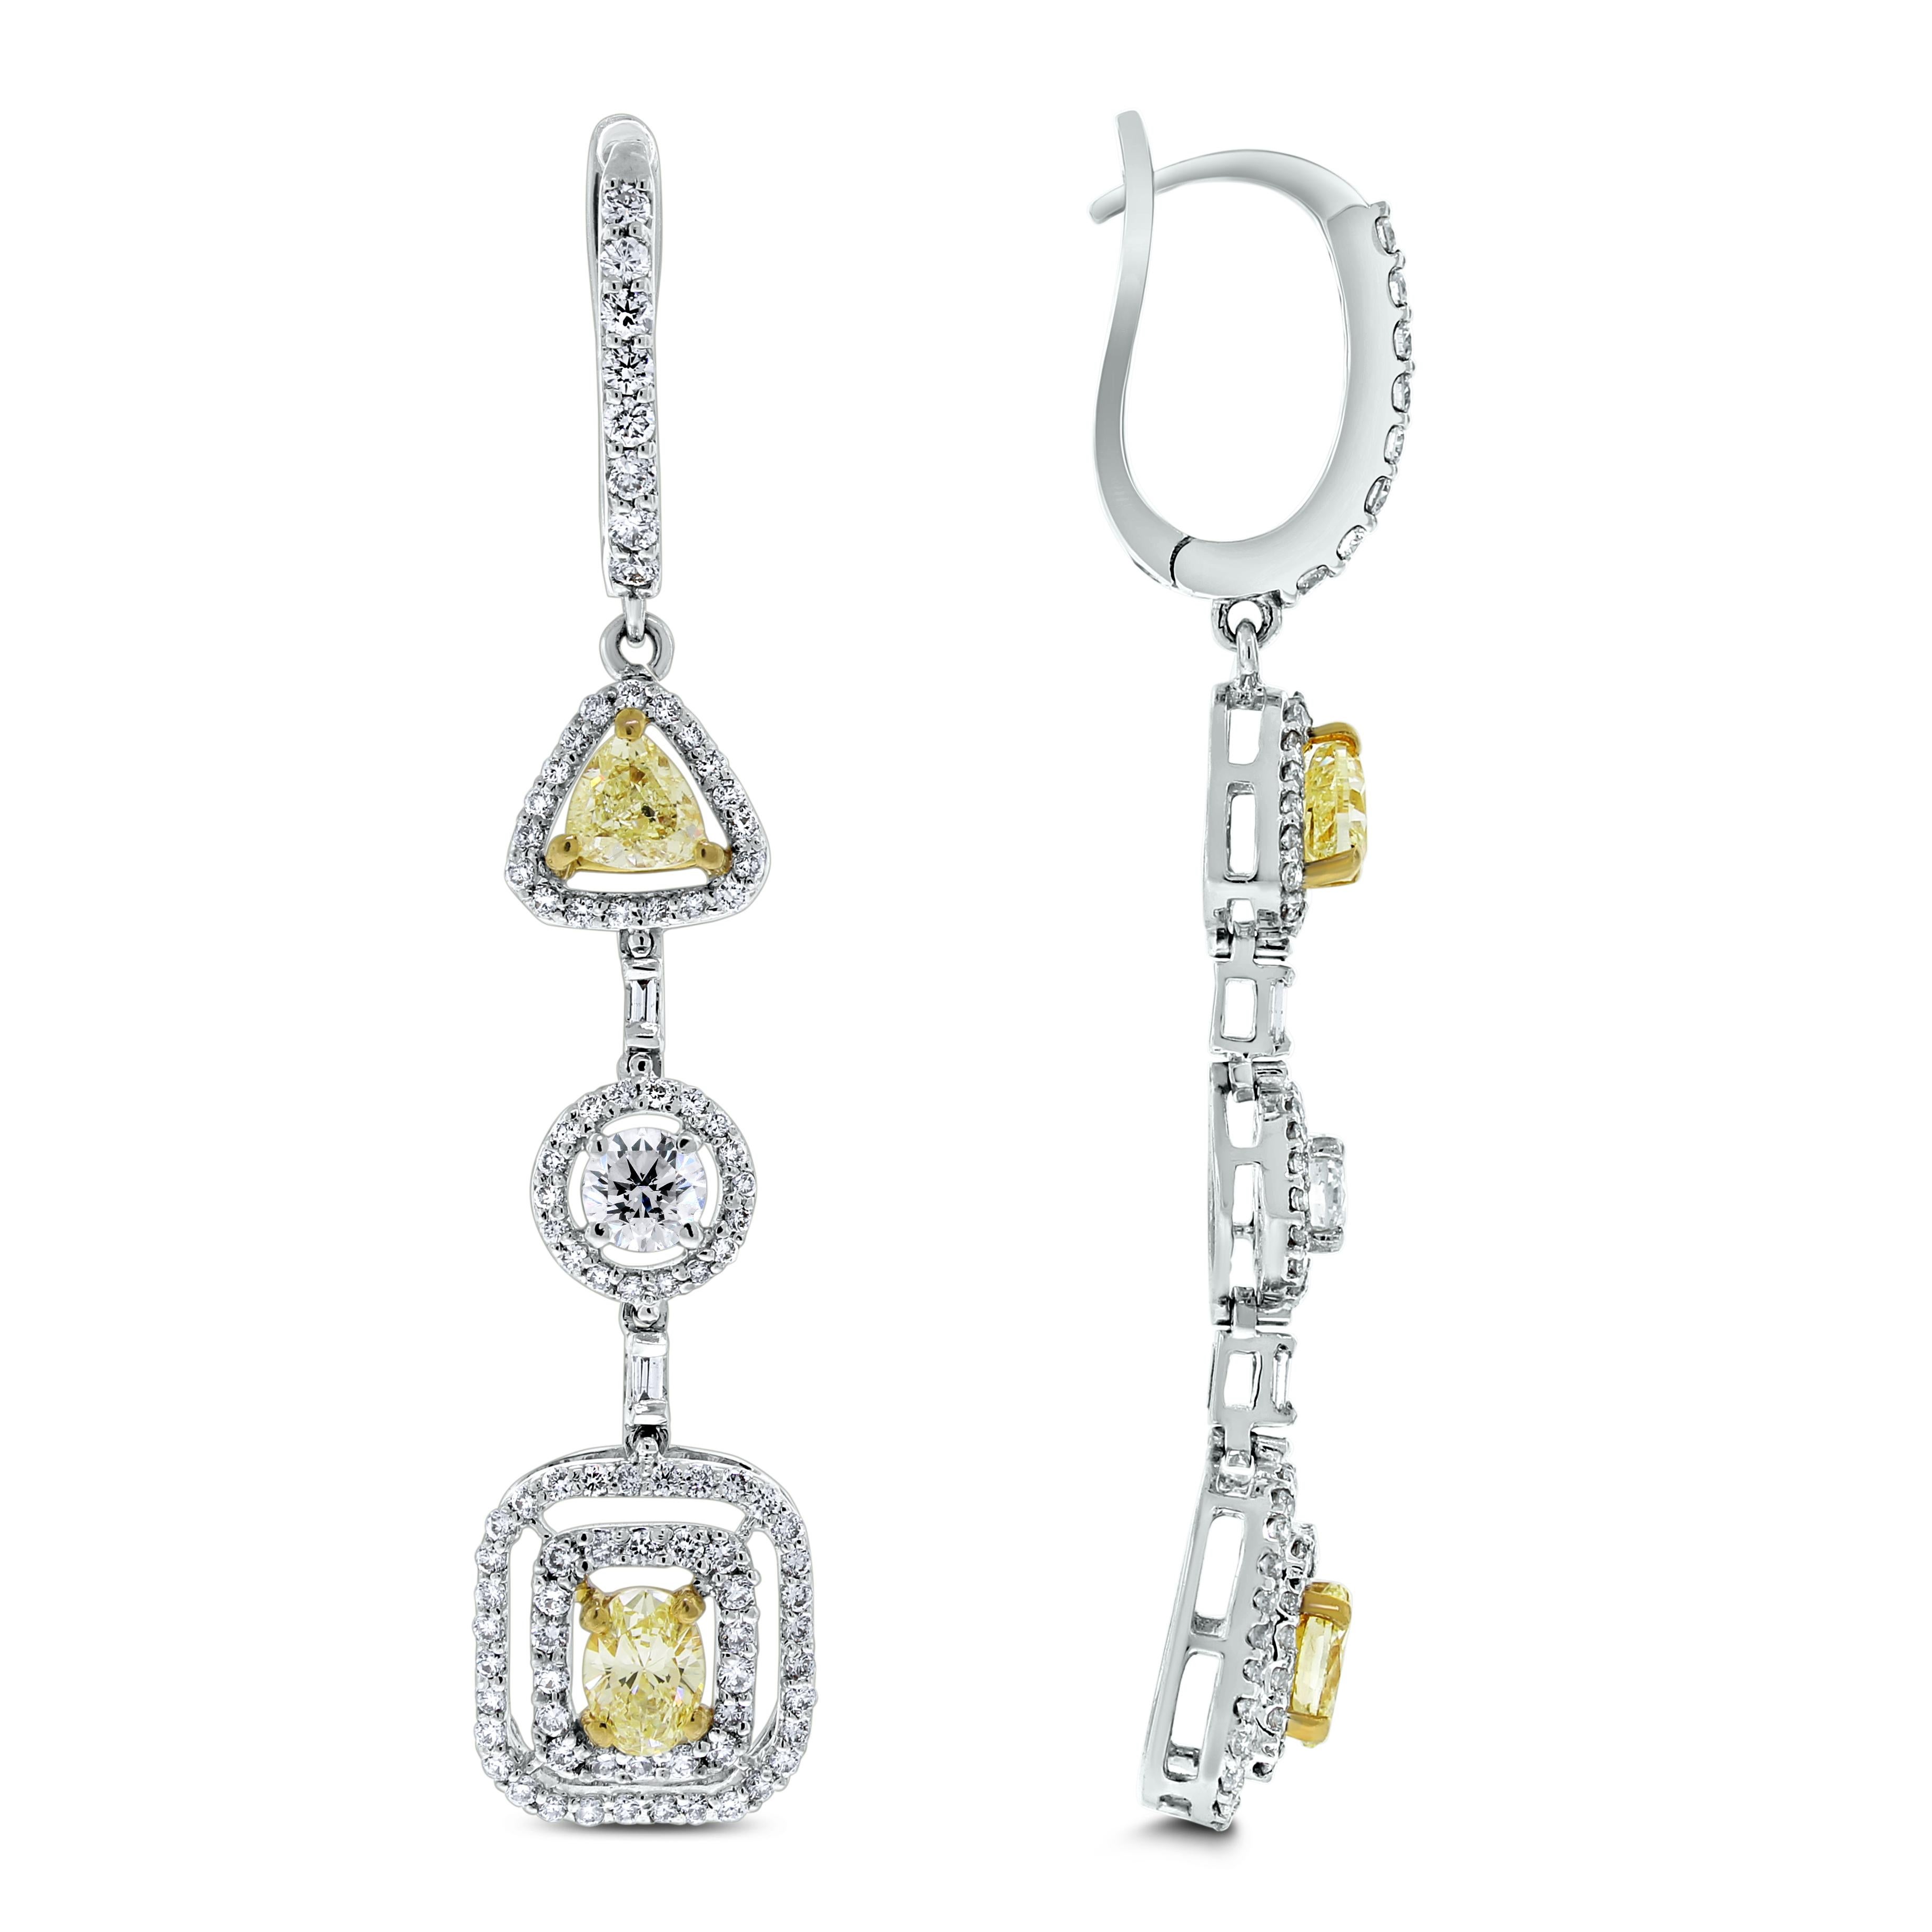 The Beauvince Summer Yellow & White Diamond Earrings feature a bright and beautiful combination of shapes in yellow and white diamonds. They are designed to sway and dazzle captivating the eyes of the onlooker.

Diamonds Shapes: Oval, Trilliant &